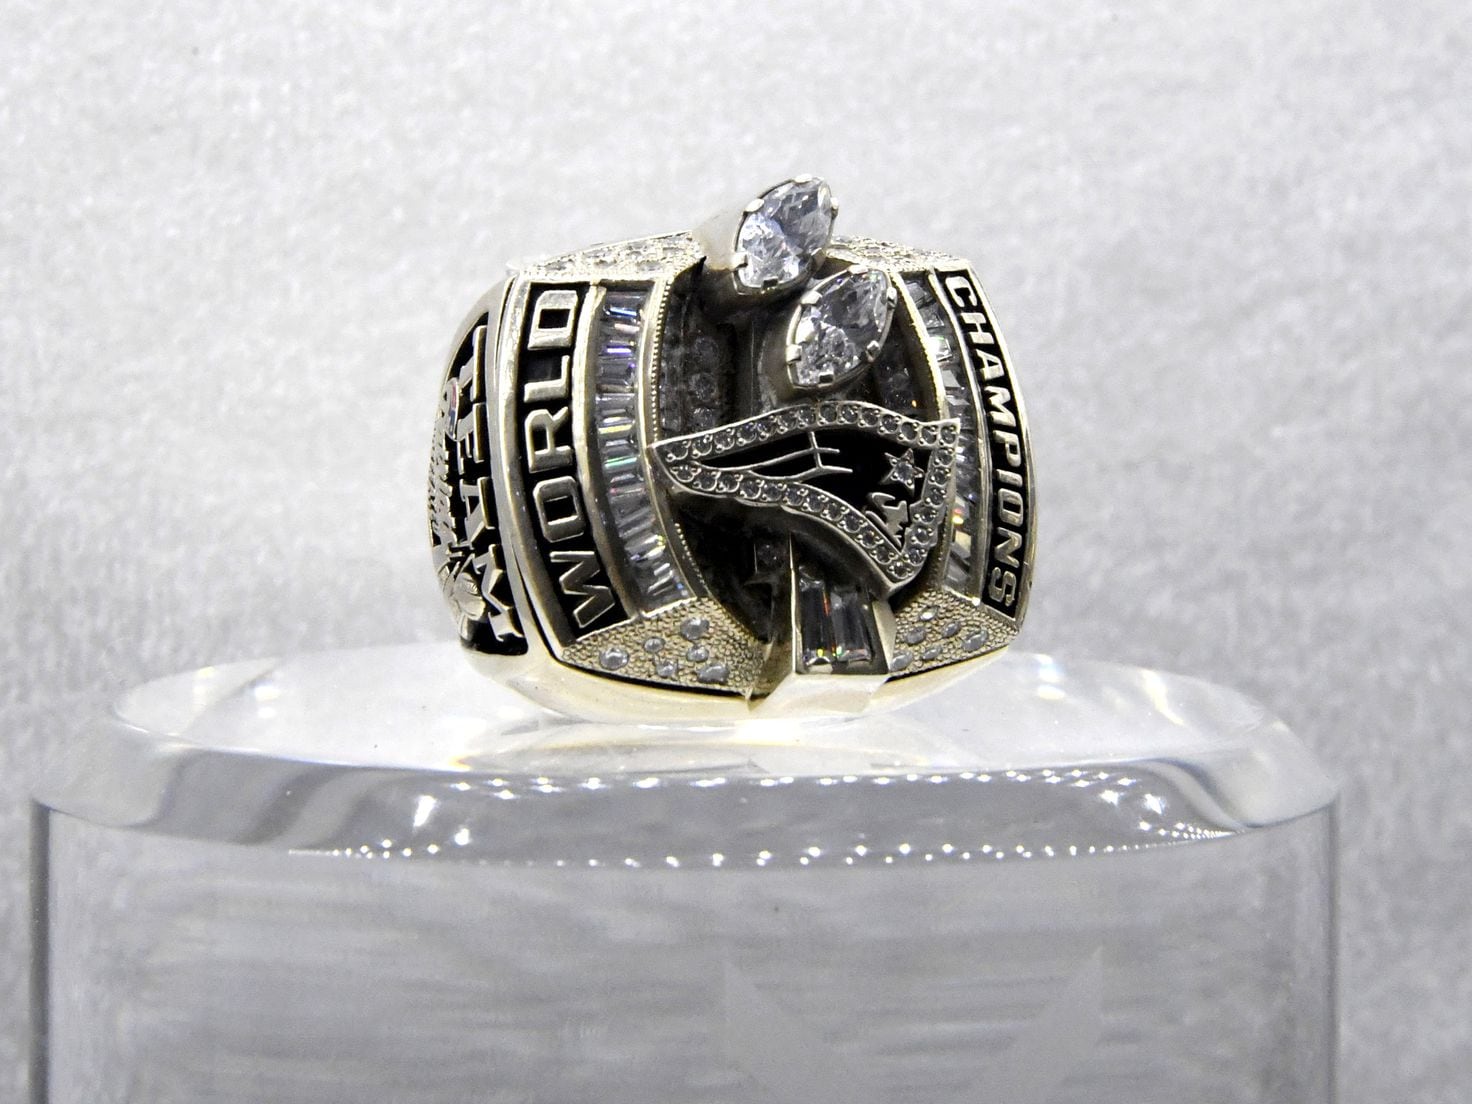 Here's what a Super bowl ring is worth